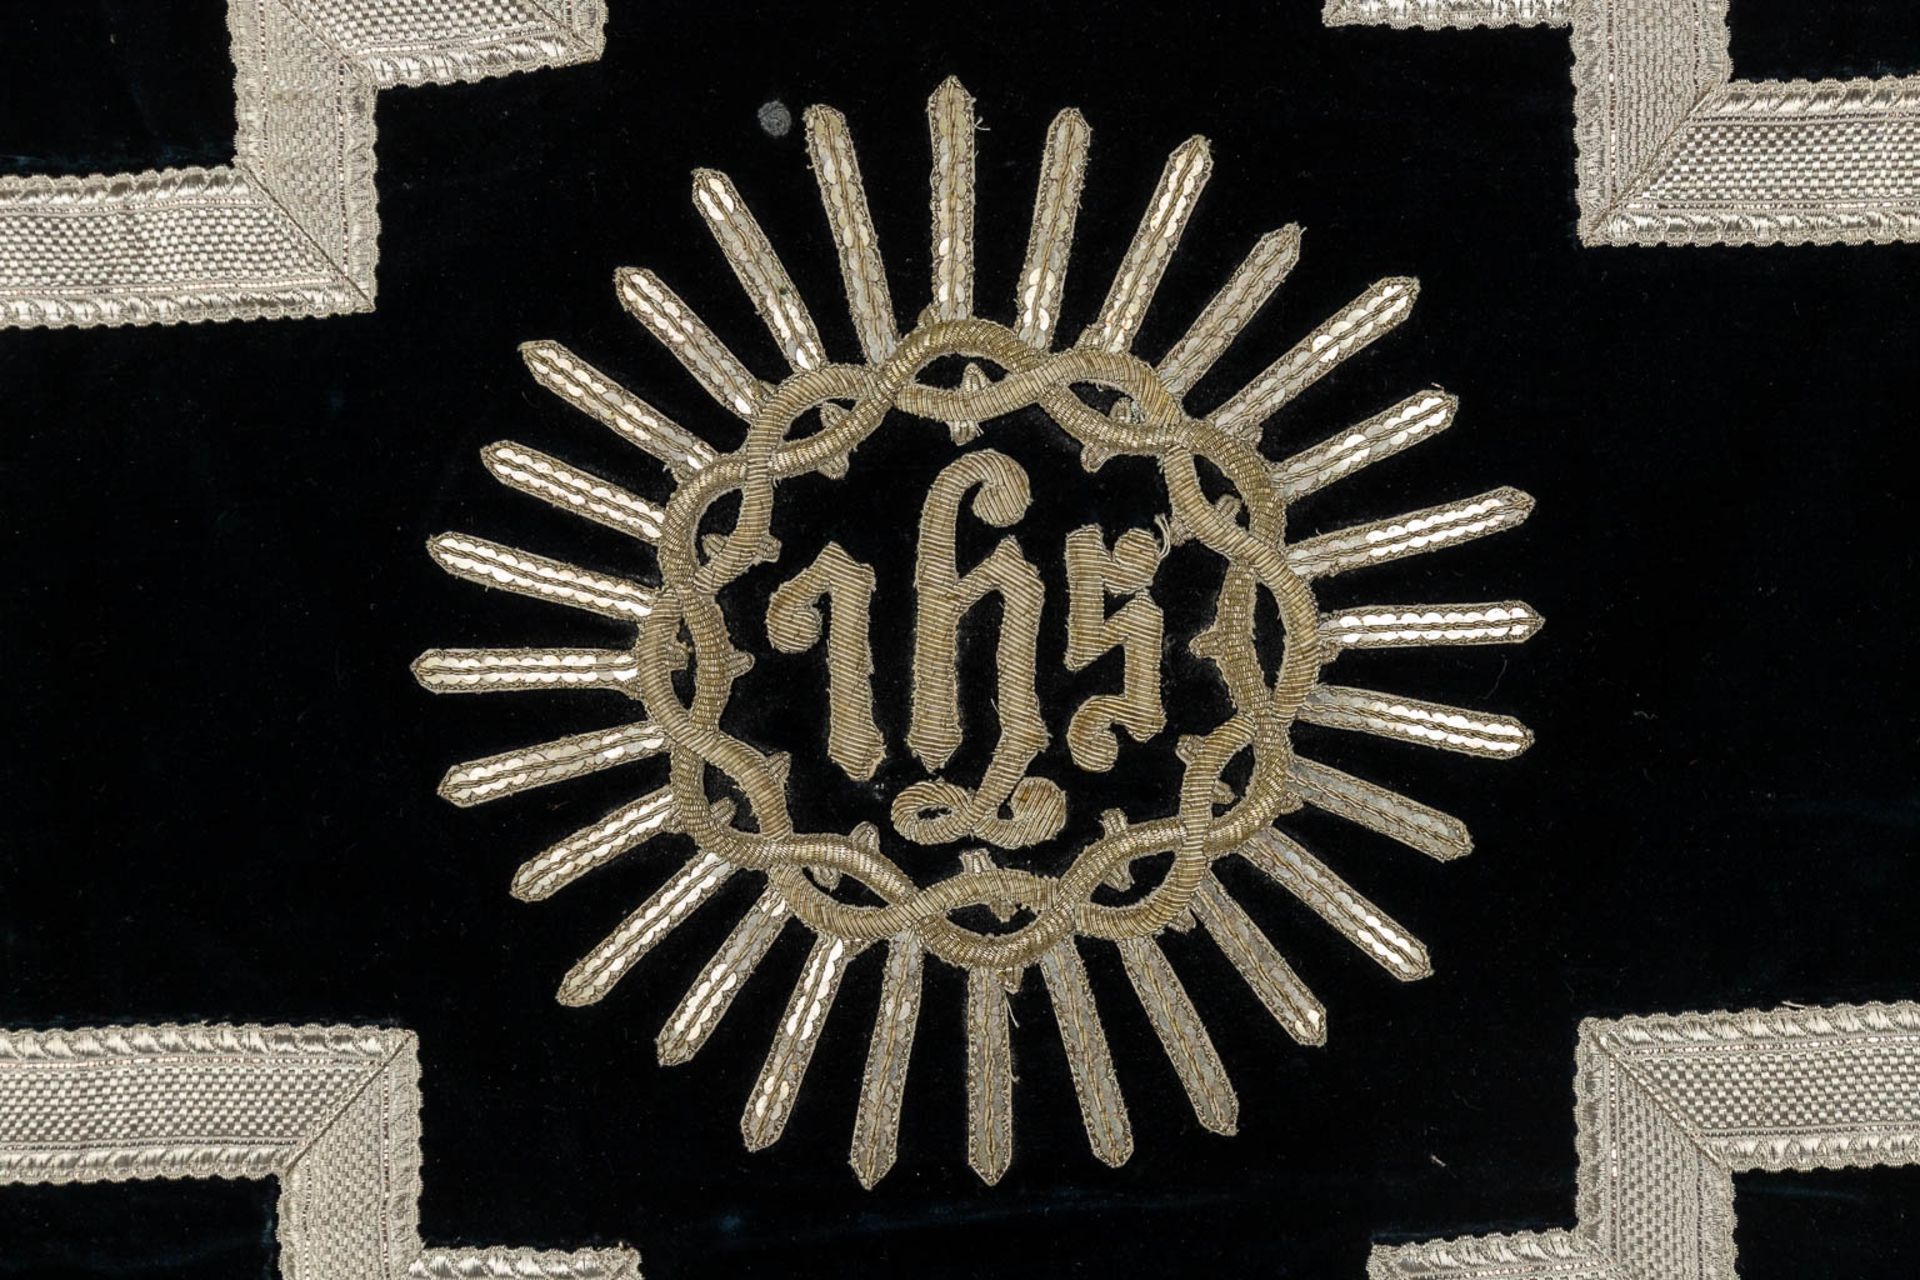 A Cope, Roman Chasuble, Stola, Brusa and Chalice Veil, Decorated with the IHS logo - Image 10 of 14